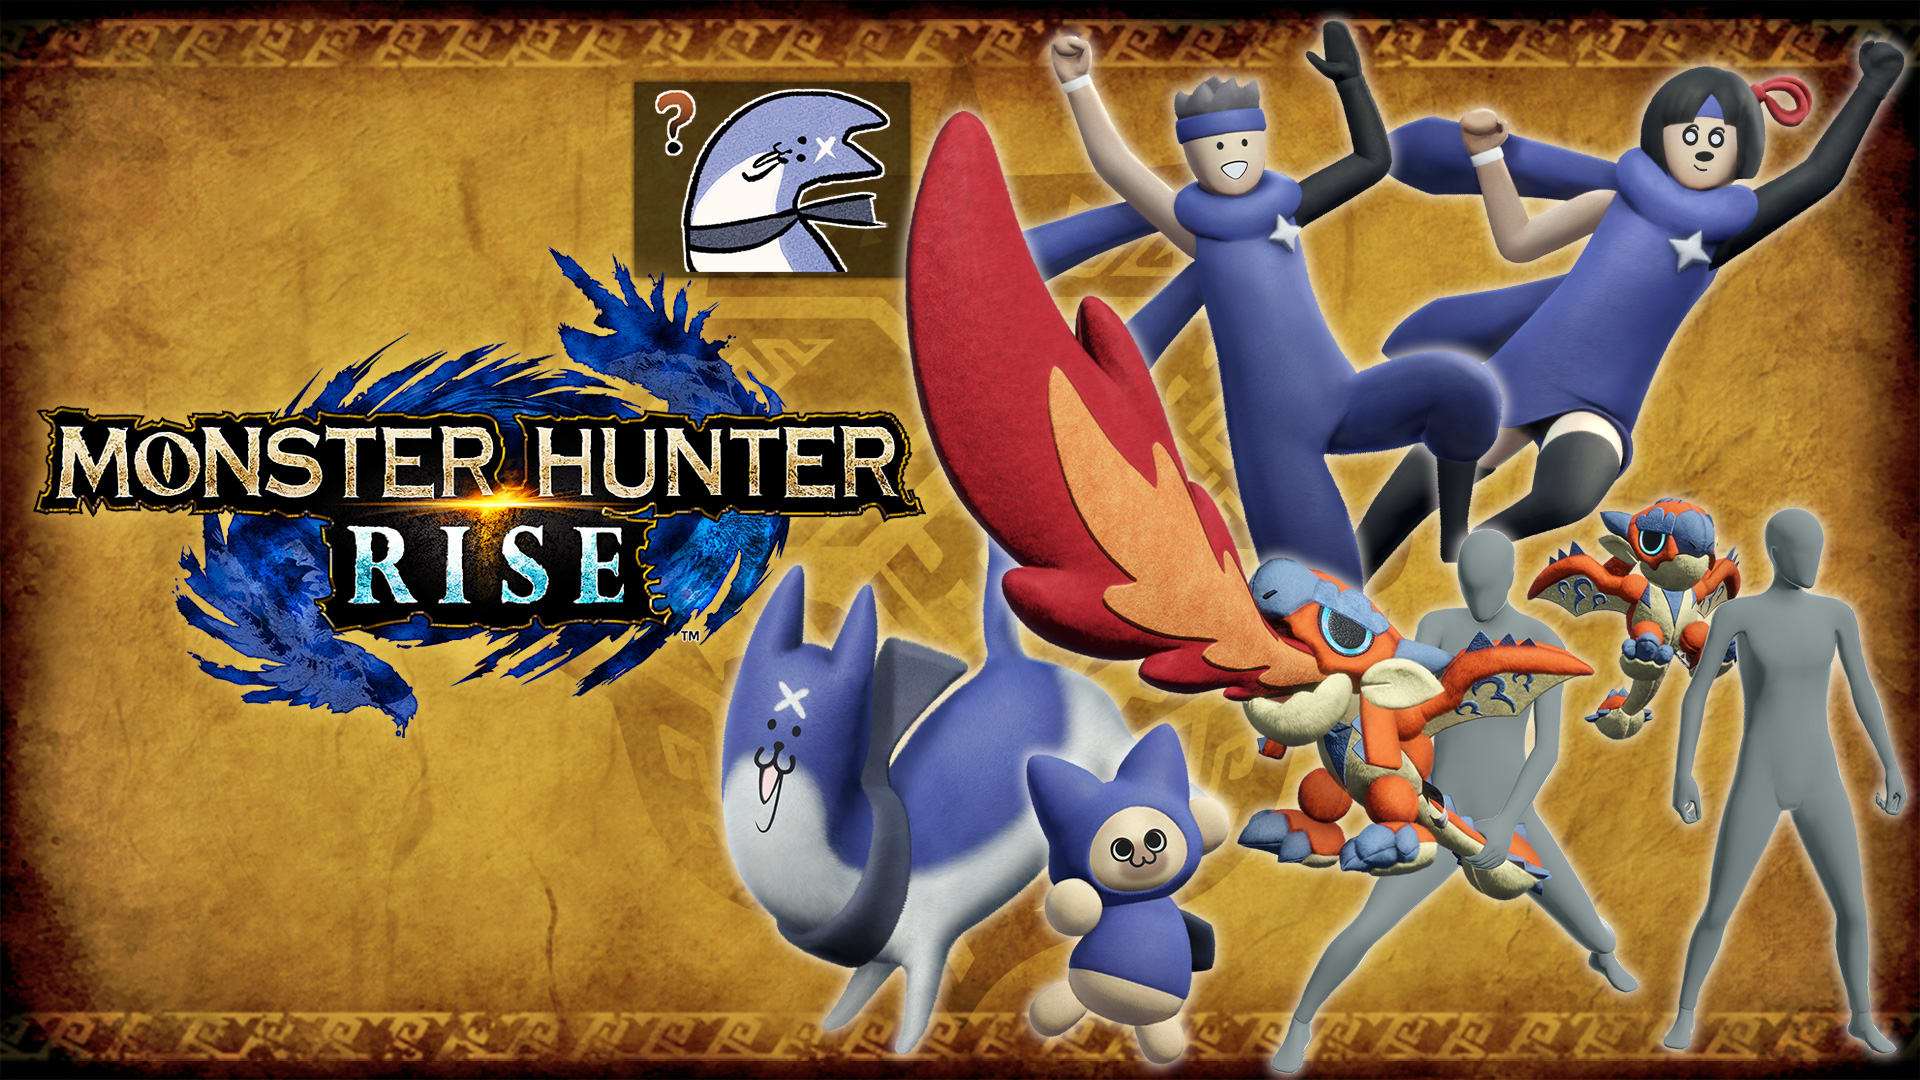 Monster Hunter Rise "Cute & Cuddly Collection" DLC Pack